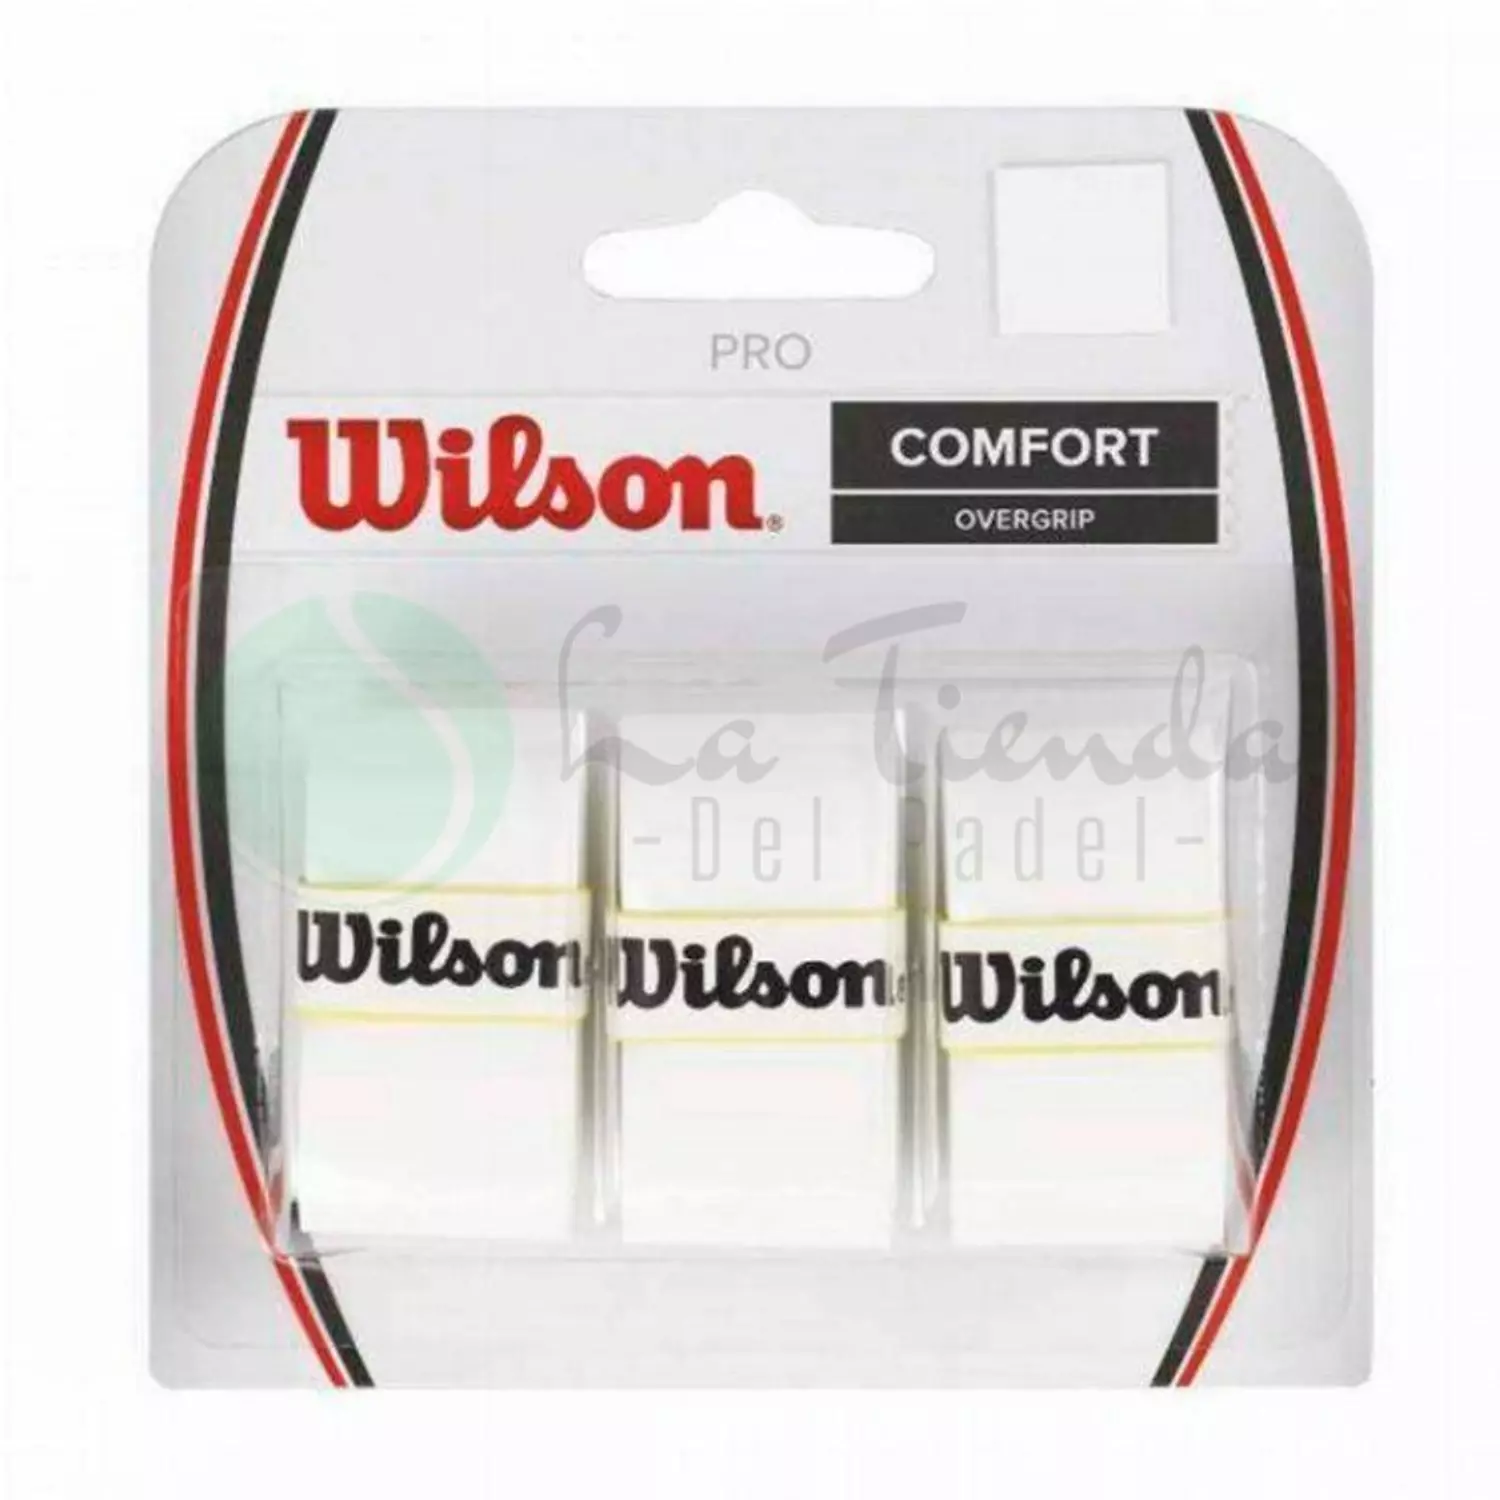 Wilson Pro Comfort White Overgrip (Pack of 3) hover image